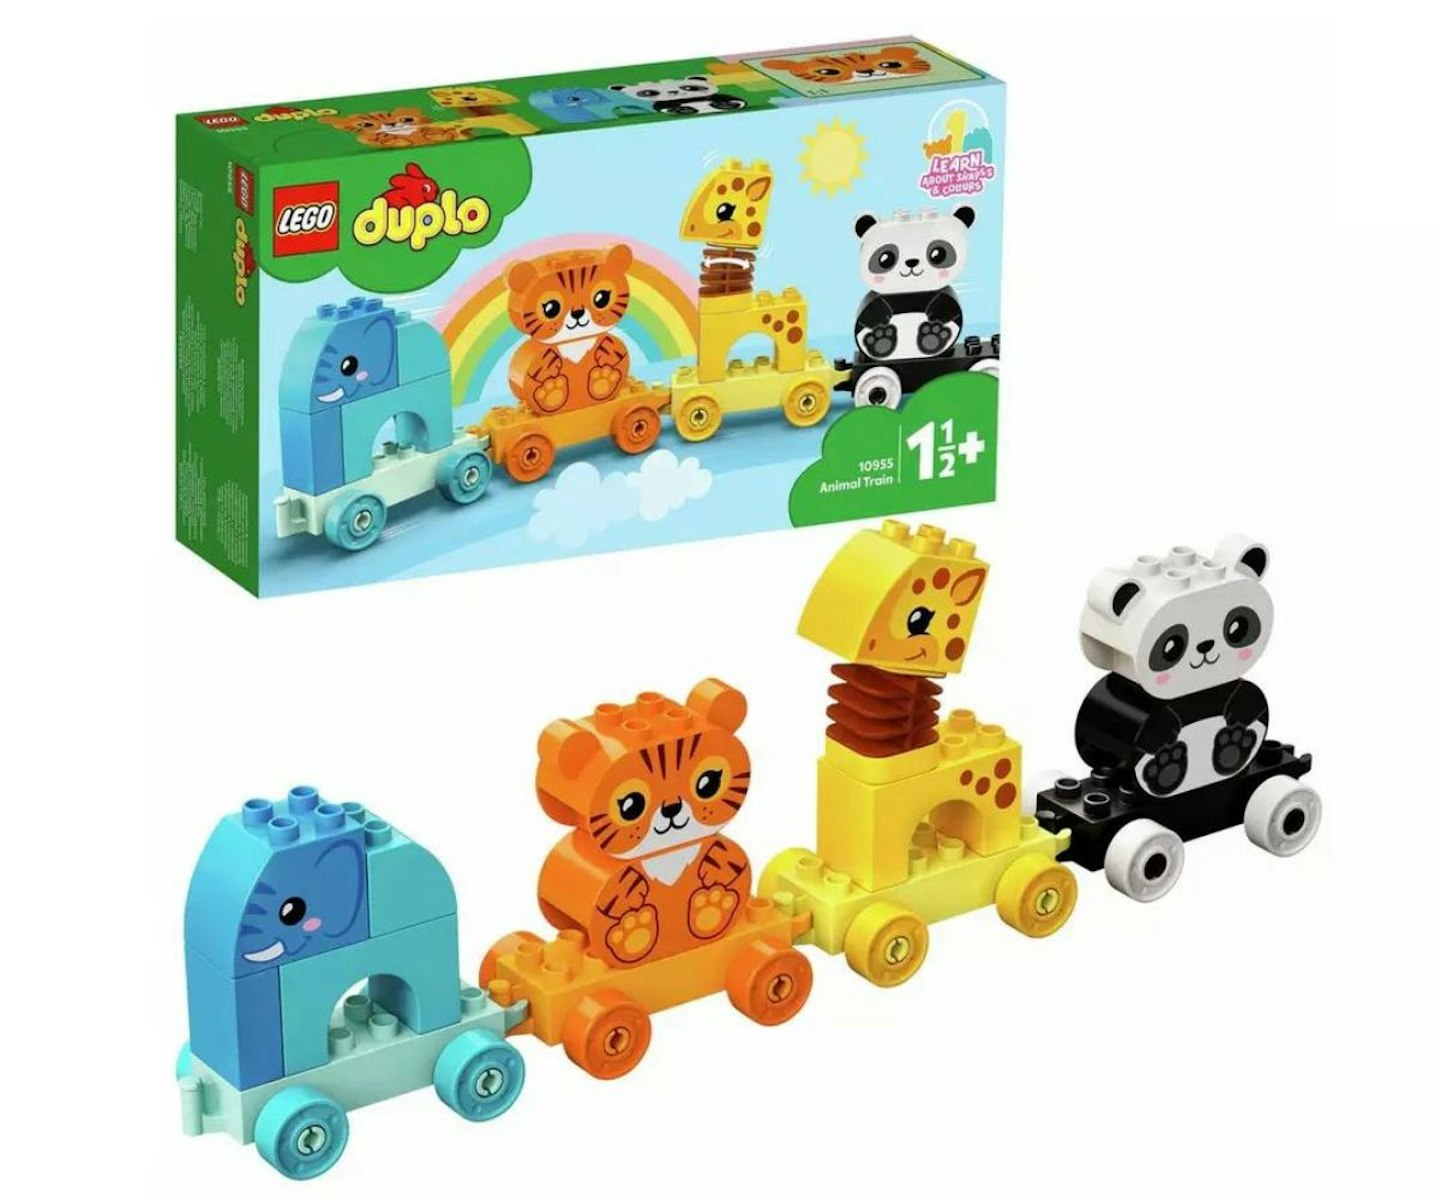 LEGO DUPLO My First Animal Train Toy for Toddlers